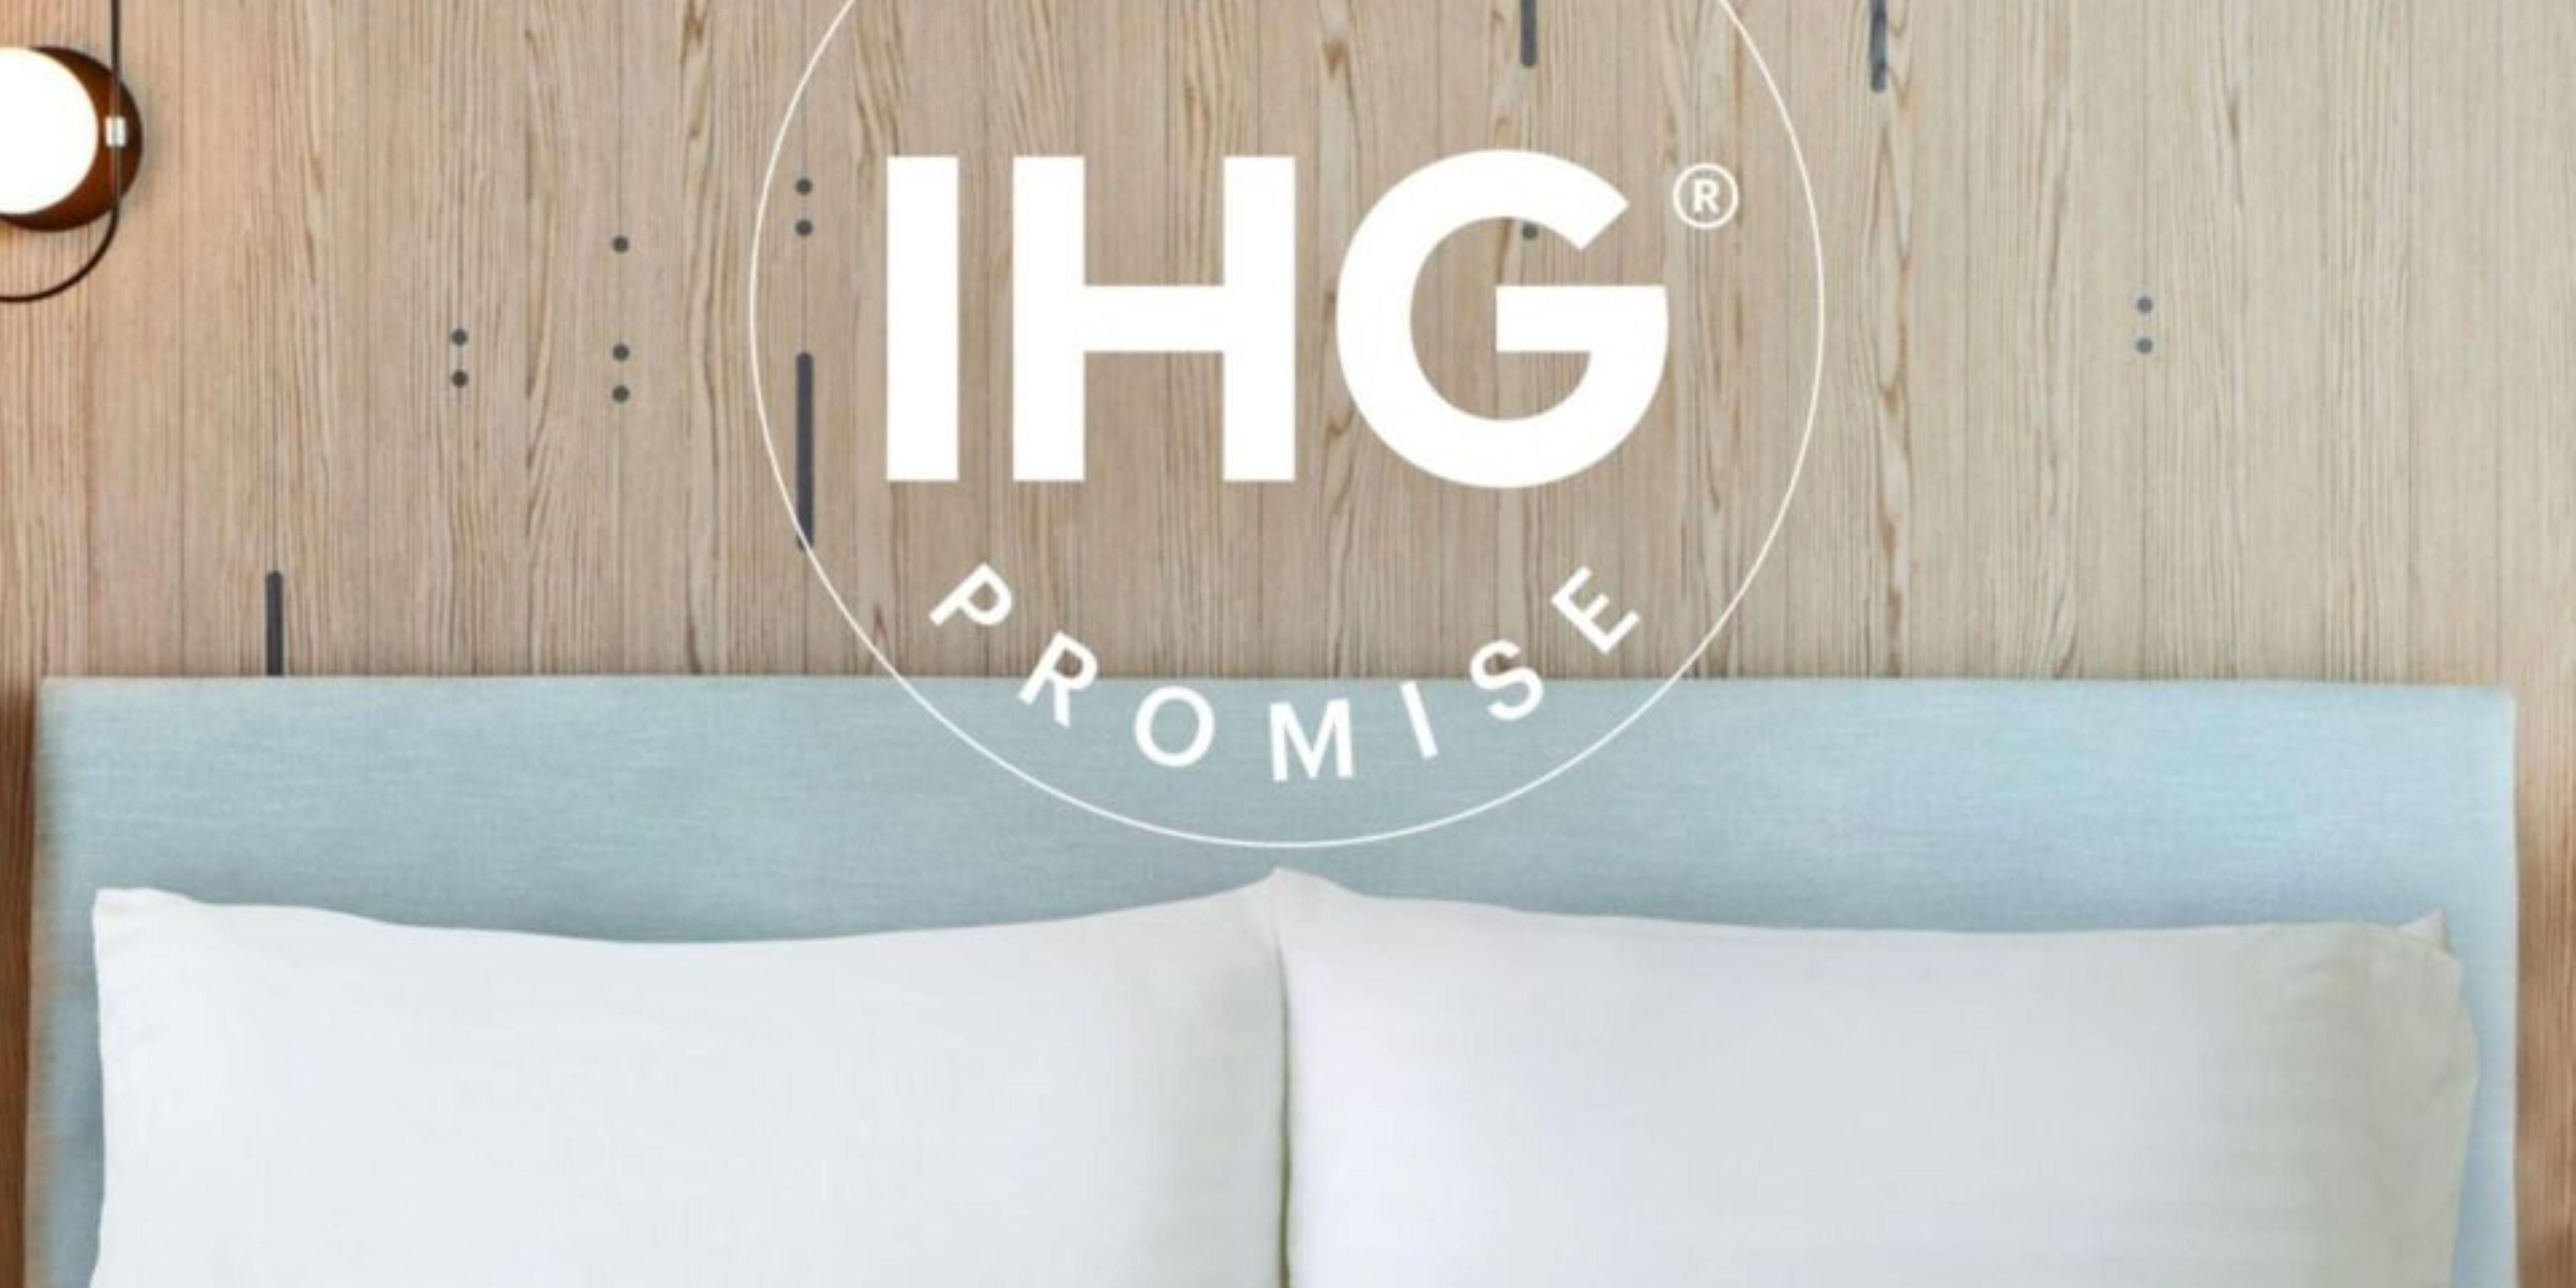 We understand how important cleanliness is to you and as an IHG Hotel, we deliver the IHG Clean Promise. If your room is not cleaned to your satisfaction, please contact the Front Desk immediately, we promise to make it right. That is the IHG clean promise